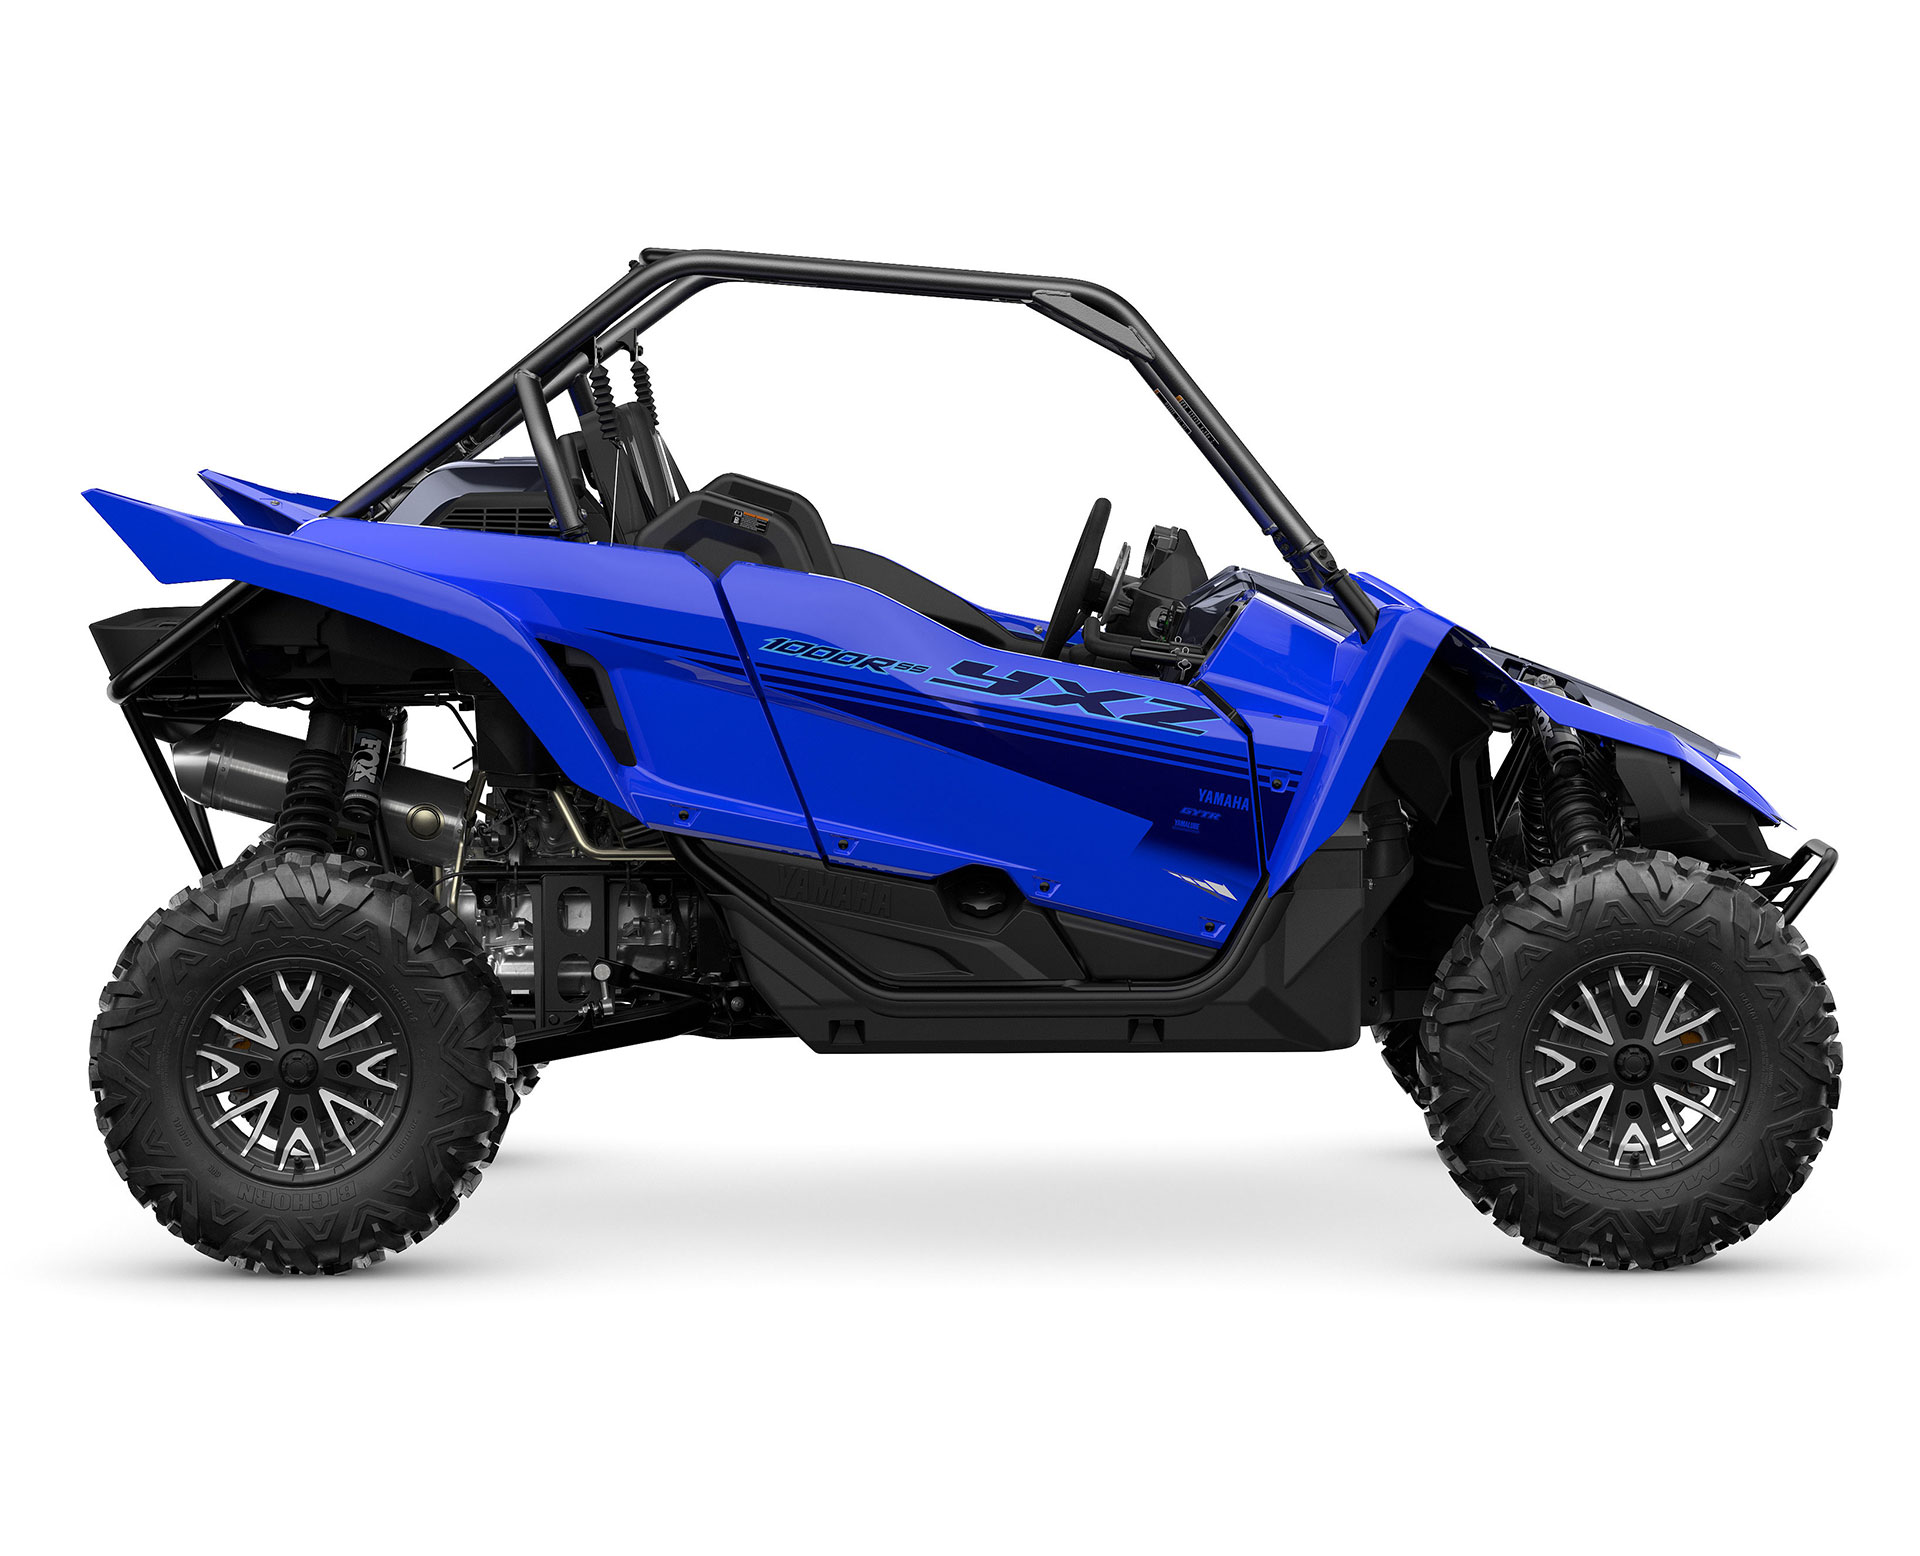 Thumbnail of your customized YXZ1000R SS EPS 2024